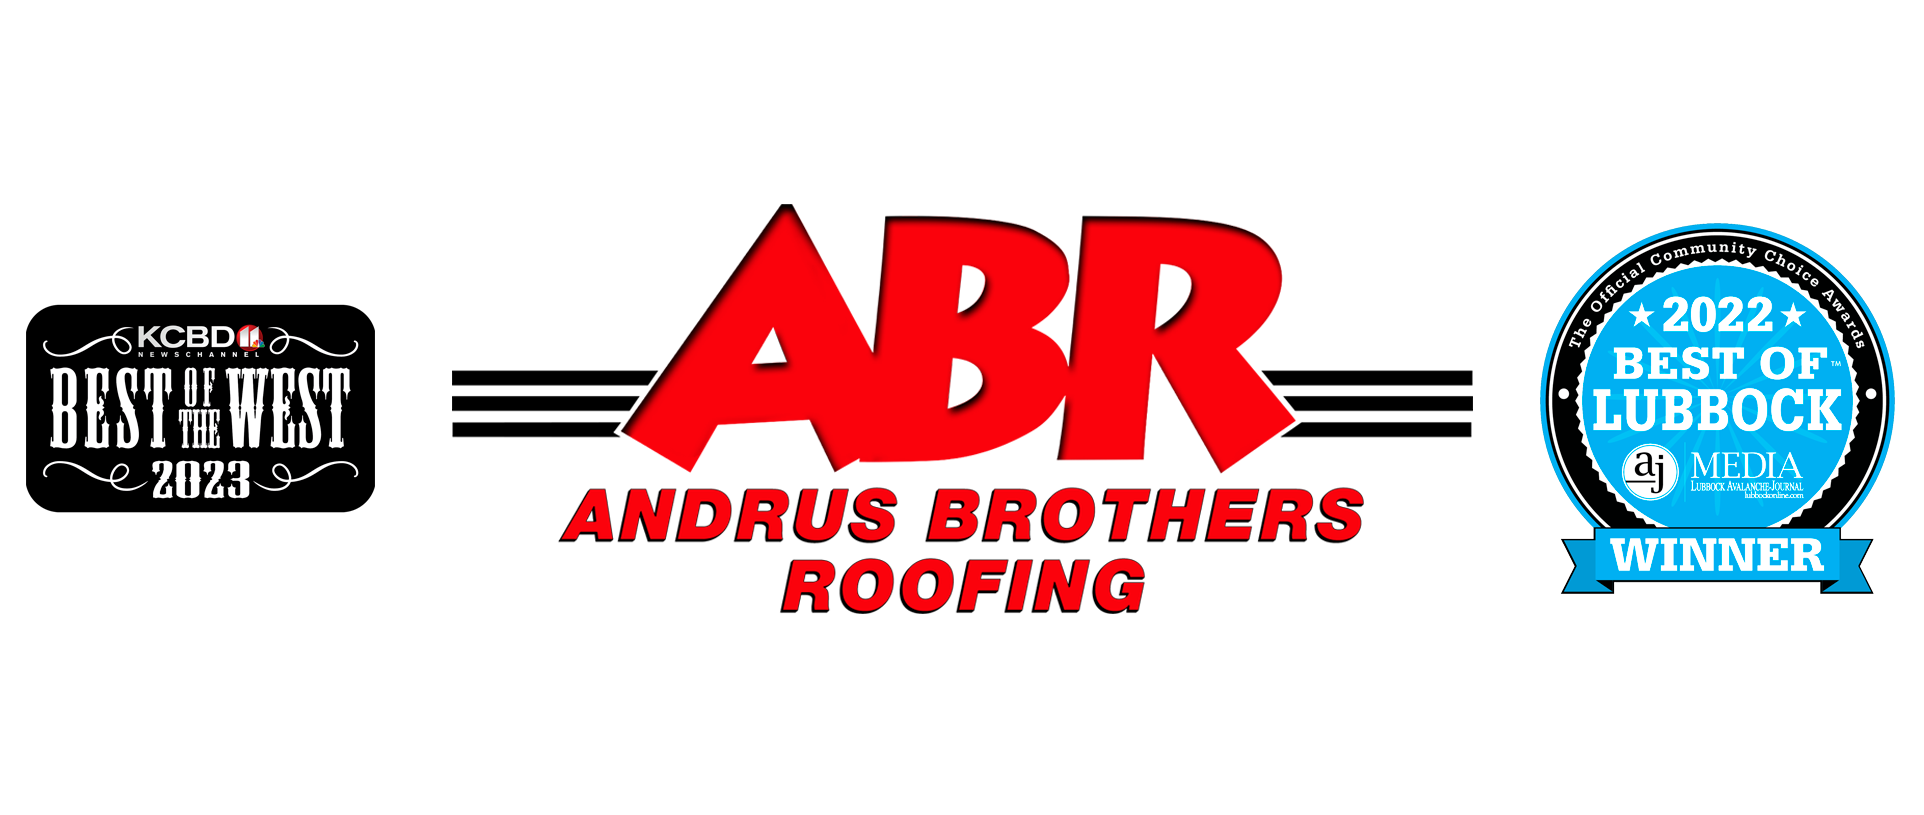 Andrus Brothers